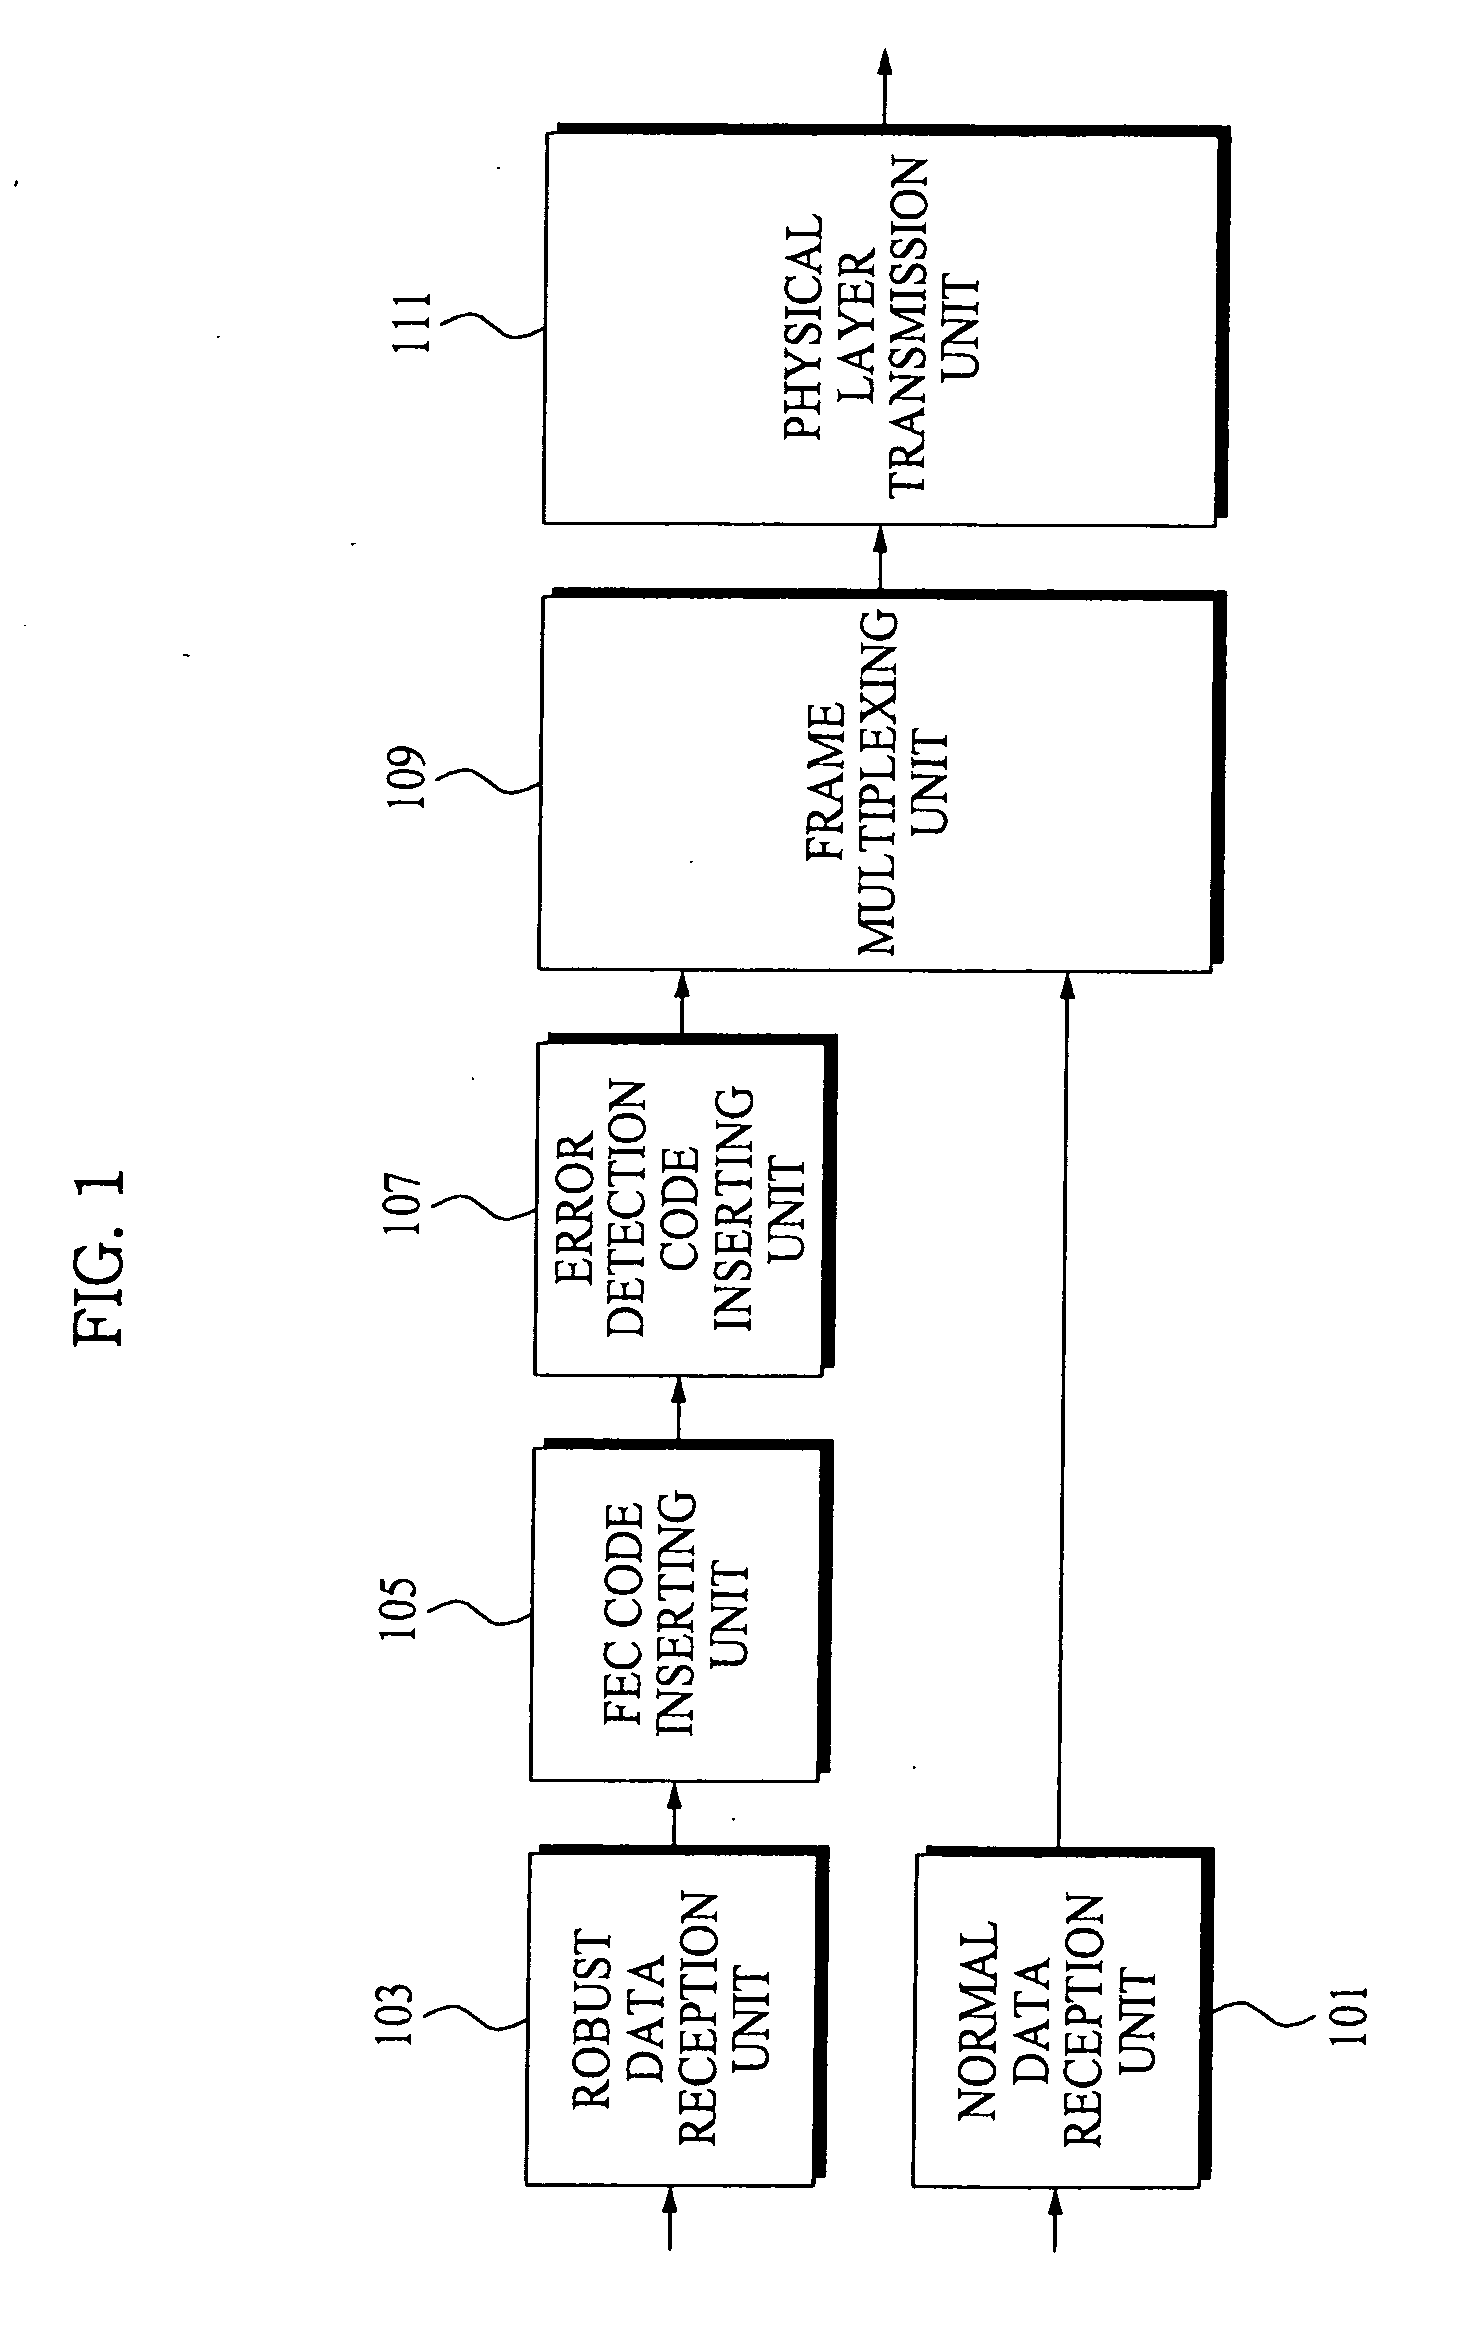 Apparatus for adaptable/variable type modulation and demodulation in digital tx/rx system